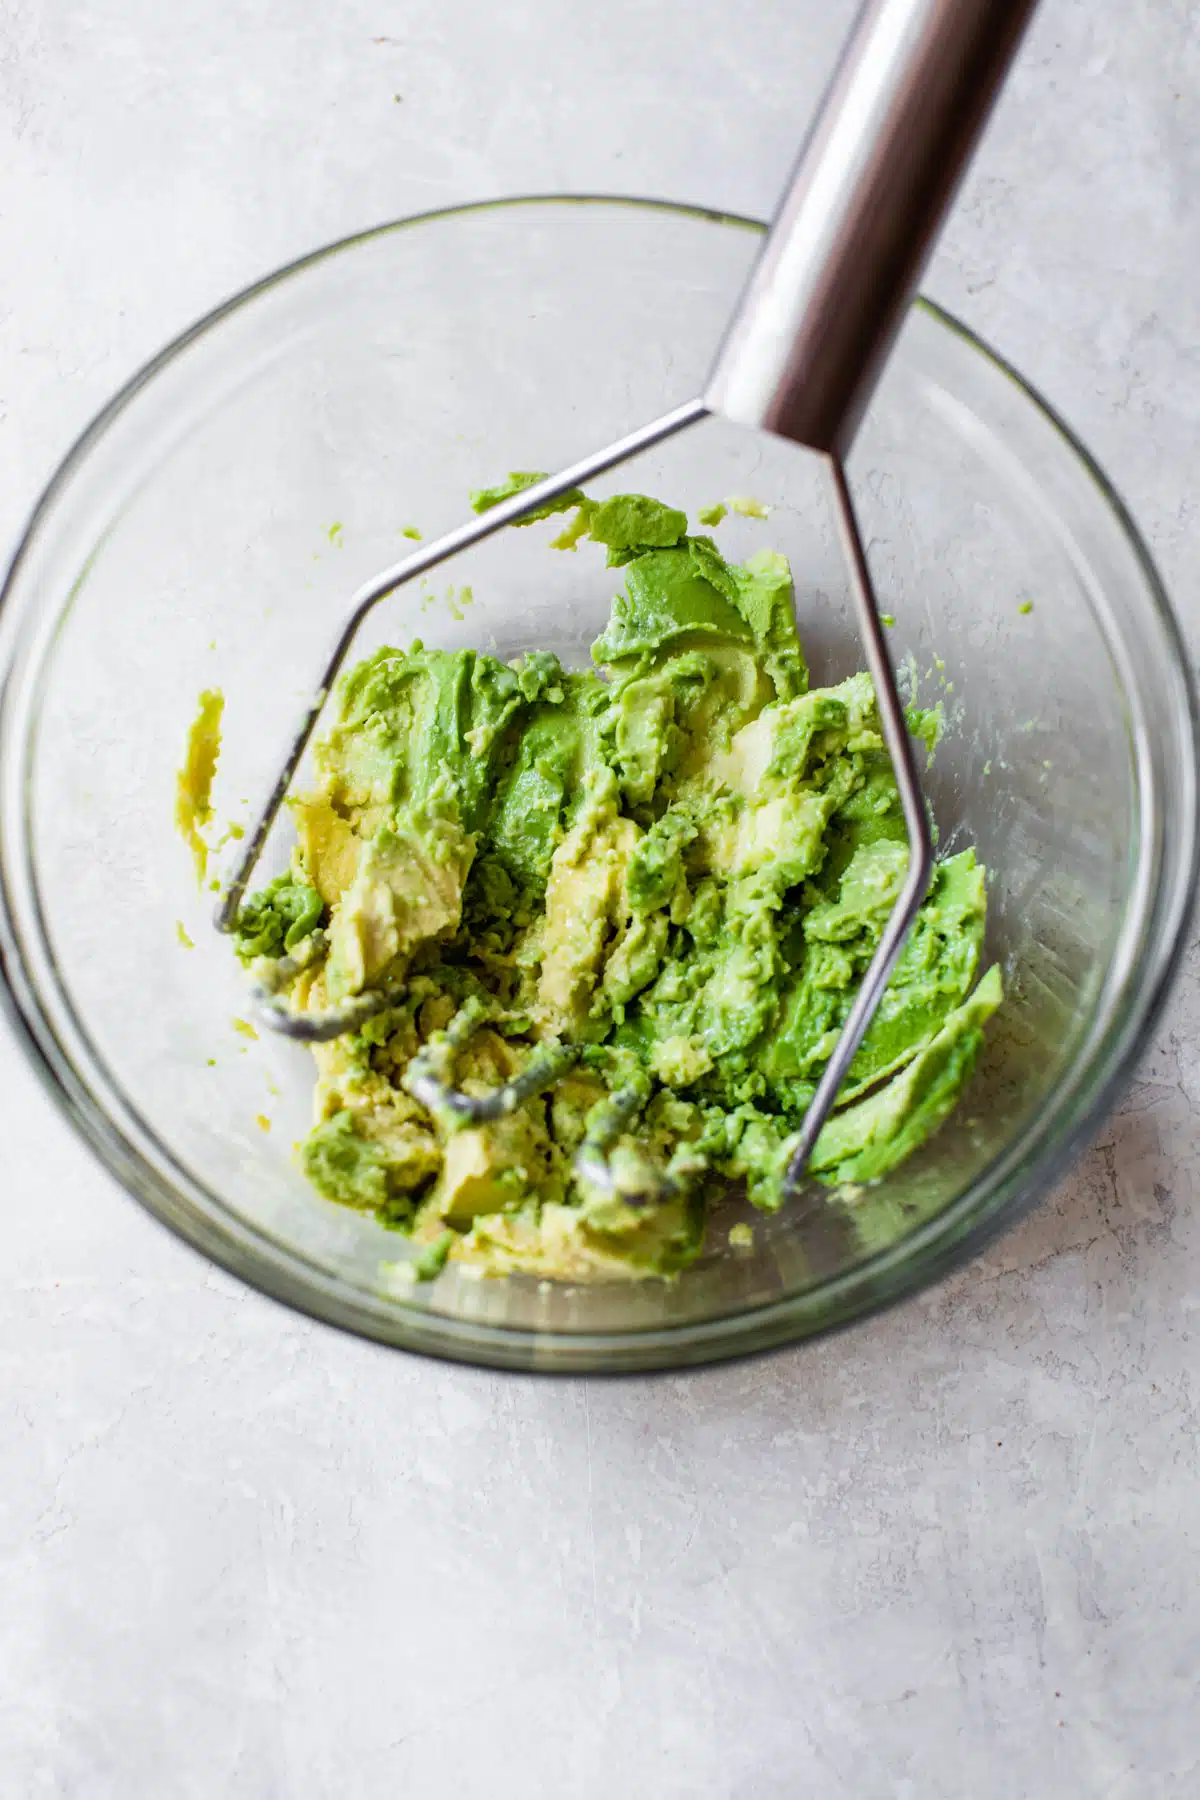 mashed avocado in a glass bowl